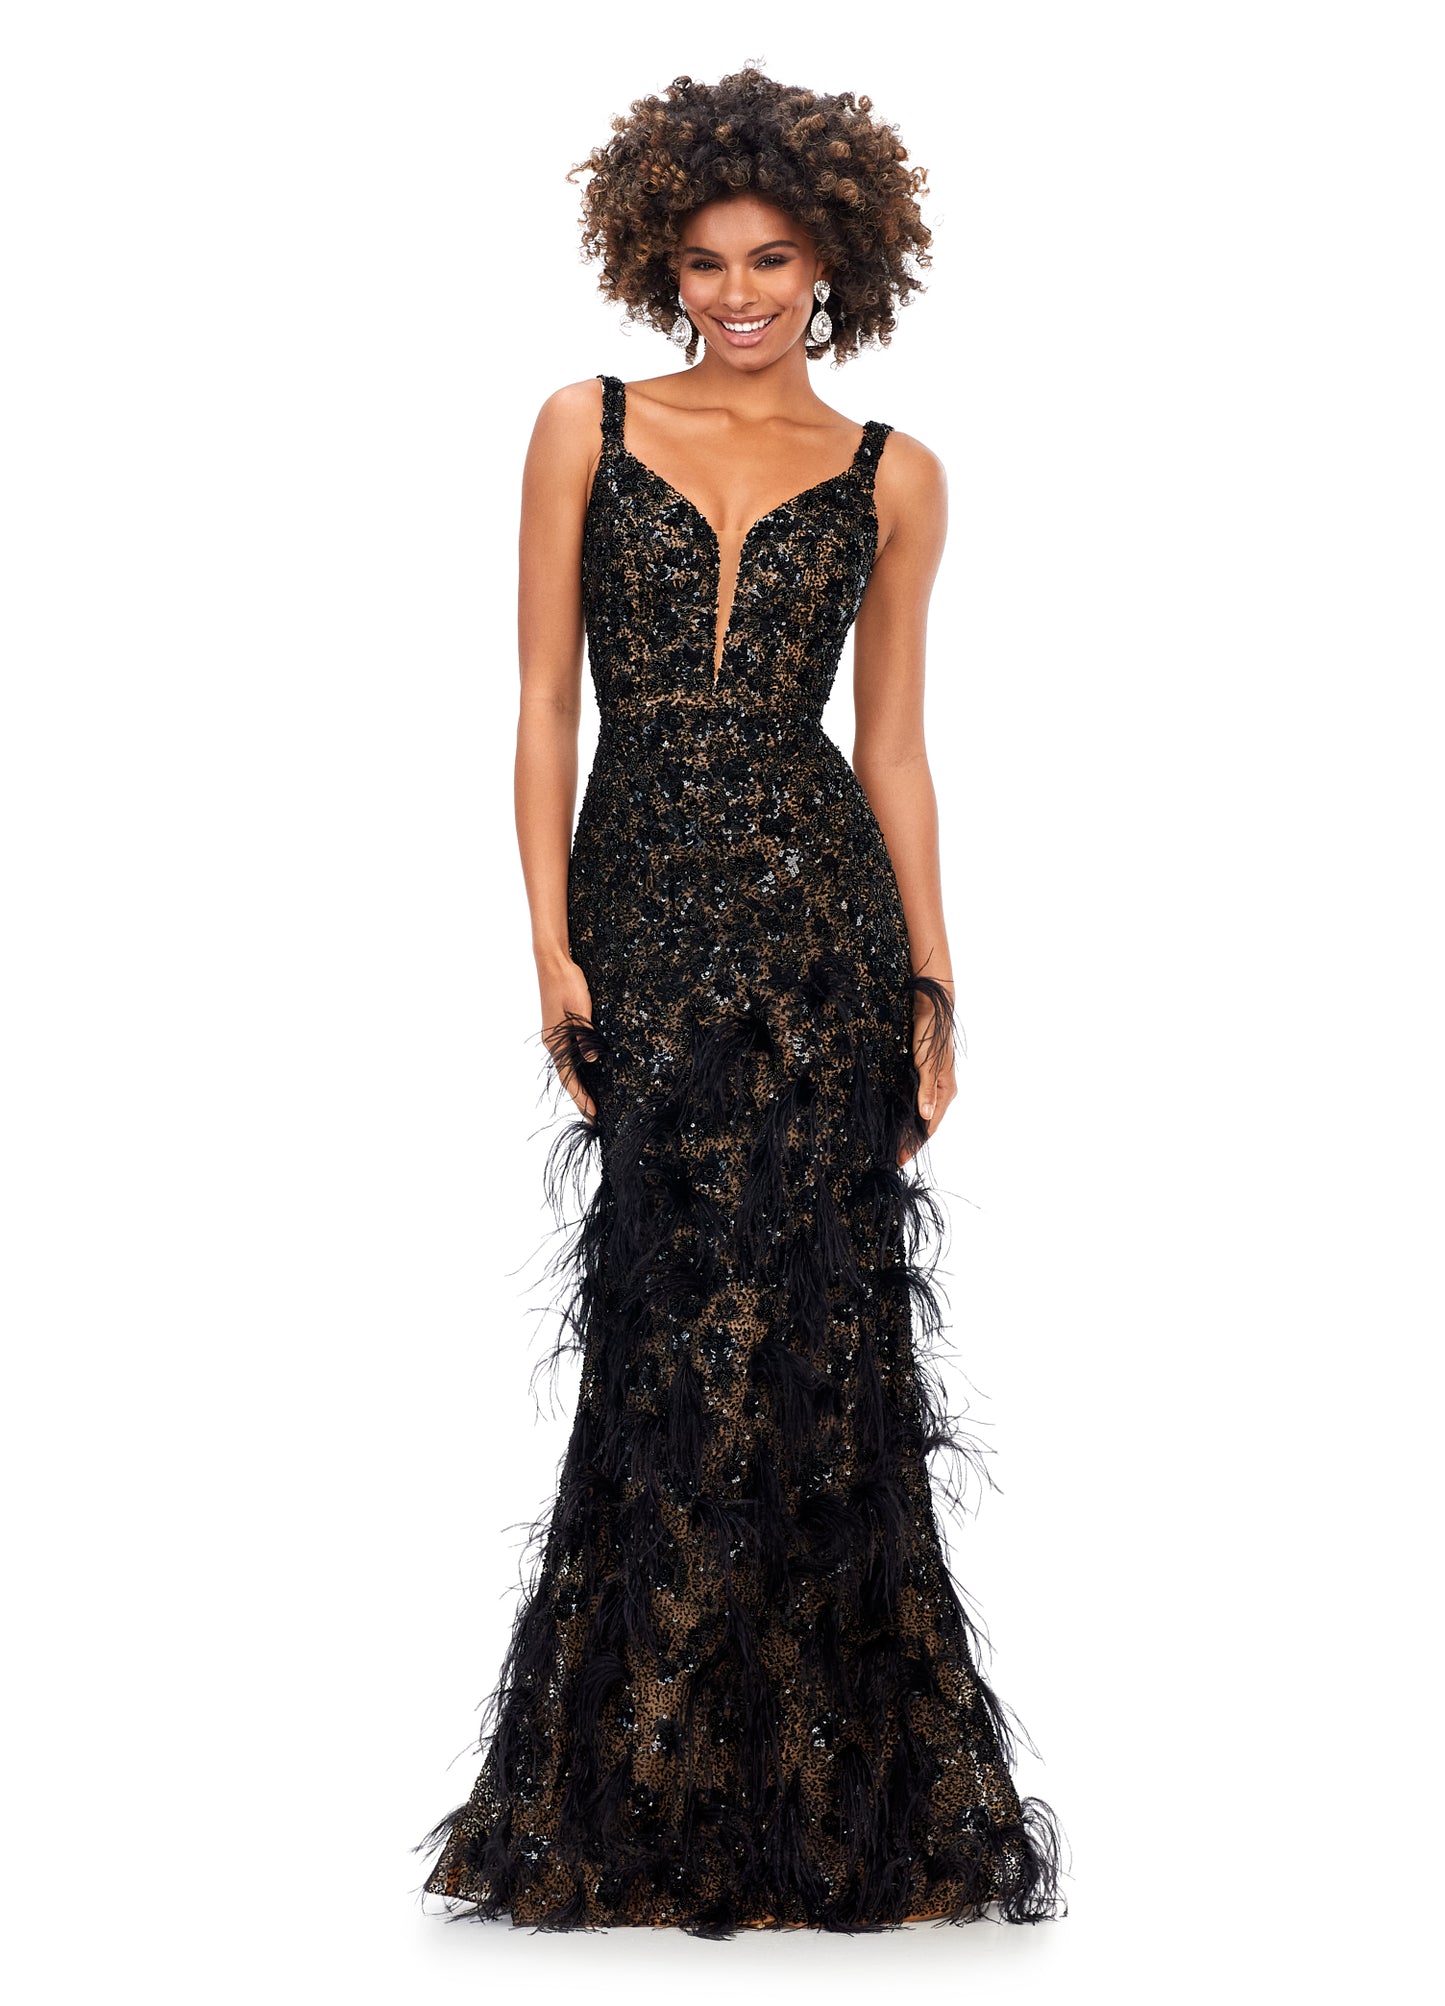 Ashley Lauren 11279 This gorgeous fitted gown features a deep illusion v-neckline and stunning beadwork throughout the entire dress. The look is complete with clusters of feathers throughout the skirt. V-Neckline Fitted Silhouette Fully Hand Beaded Feather Accents COLOR: Black